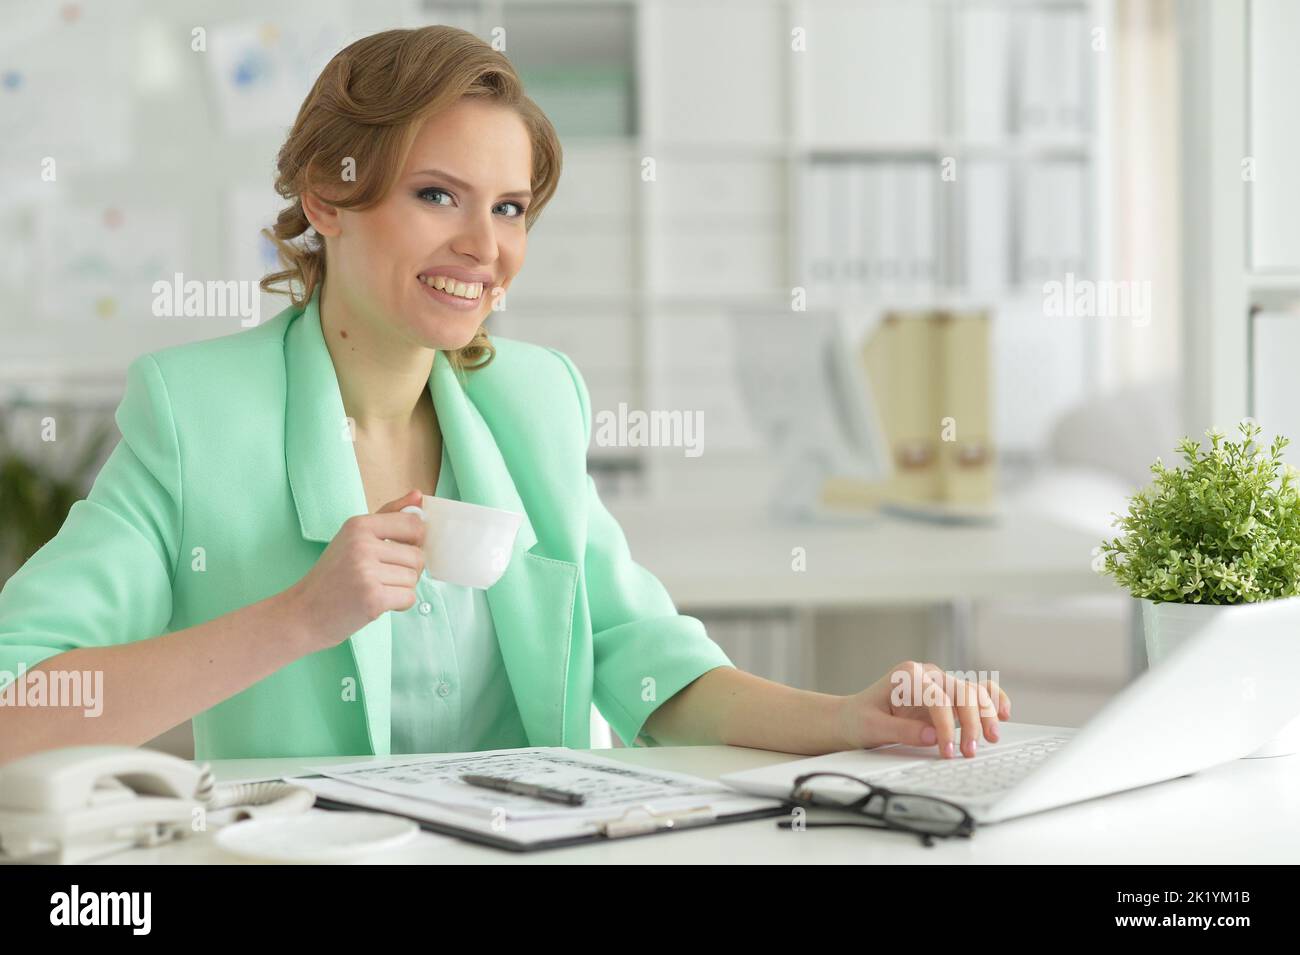 Portrait of a smiling beautiful business woman using a laptop. Stock Photo